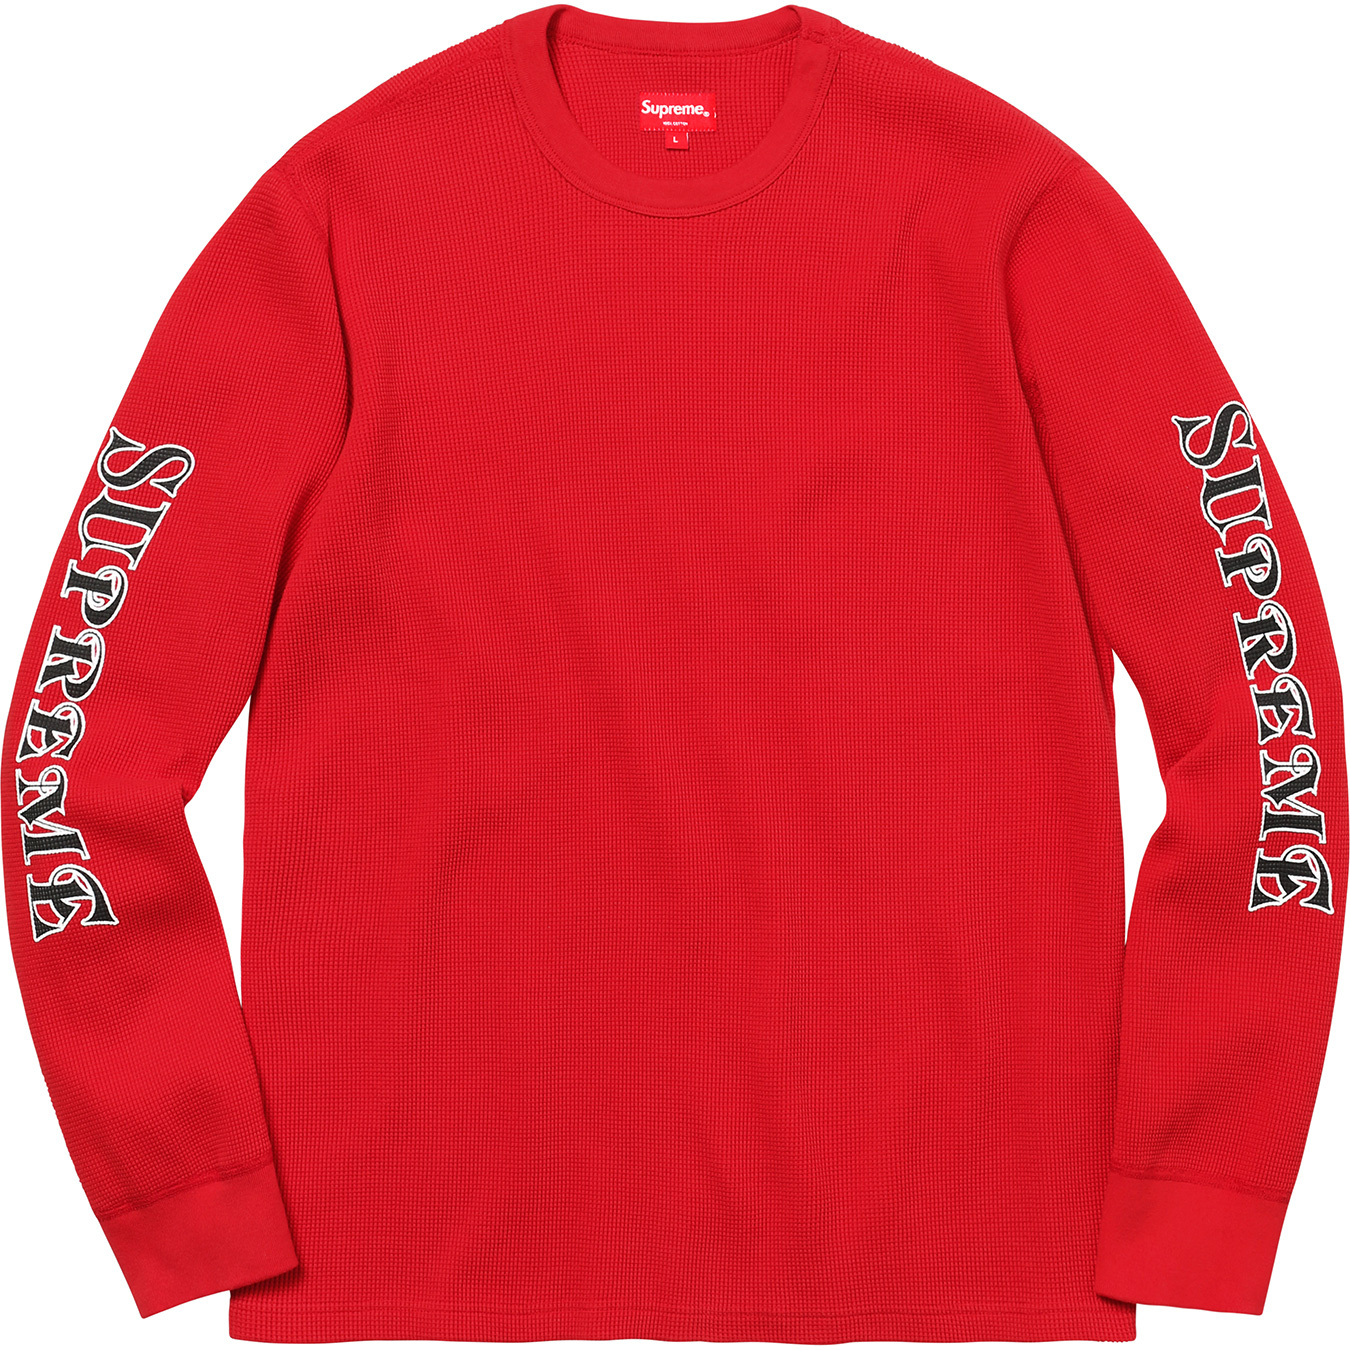 Supreme Sleeve Logo Waffle Thermal Red Men's - FW17 - US